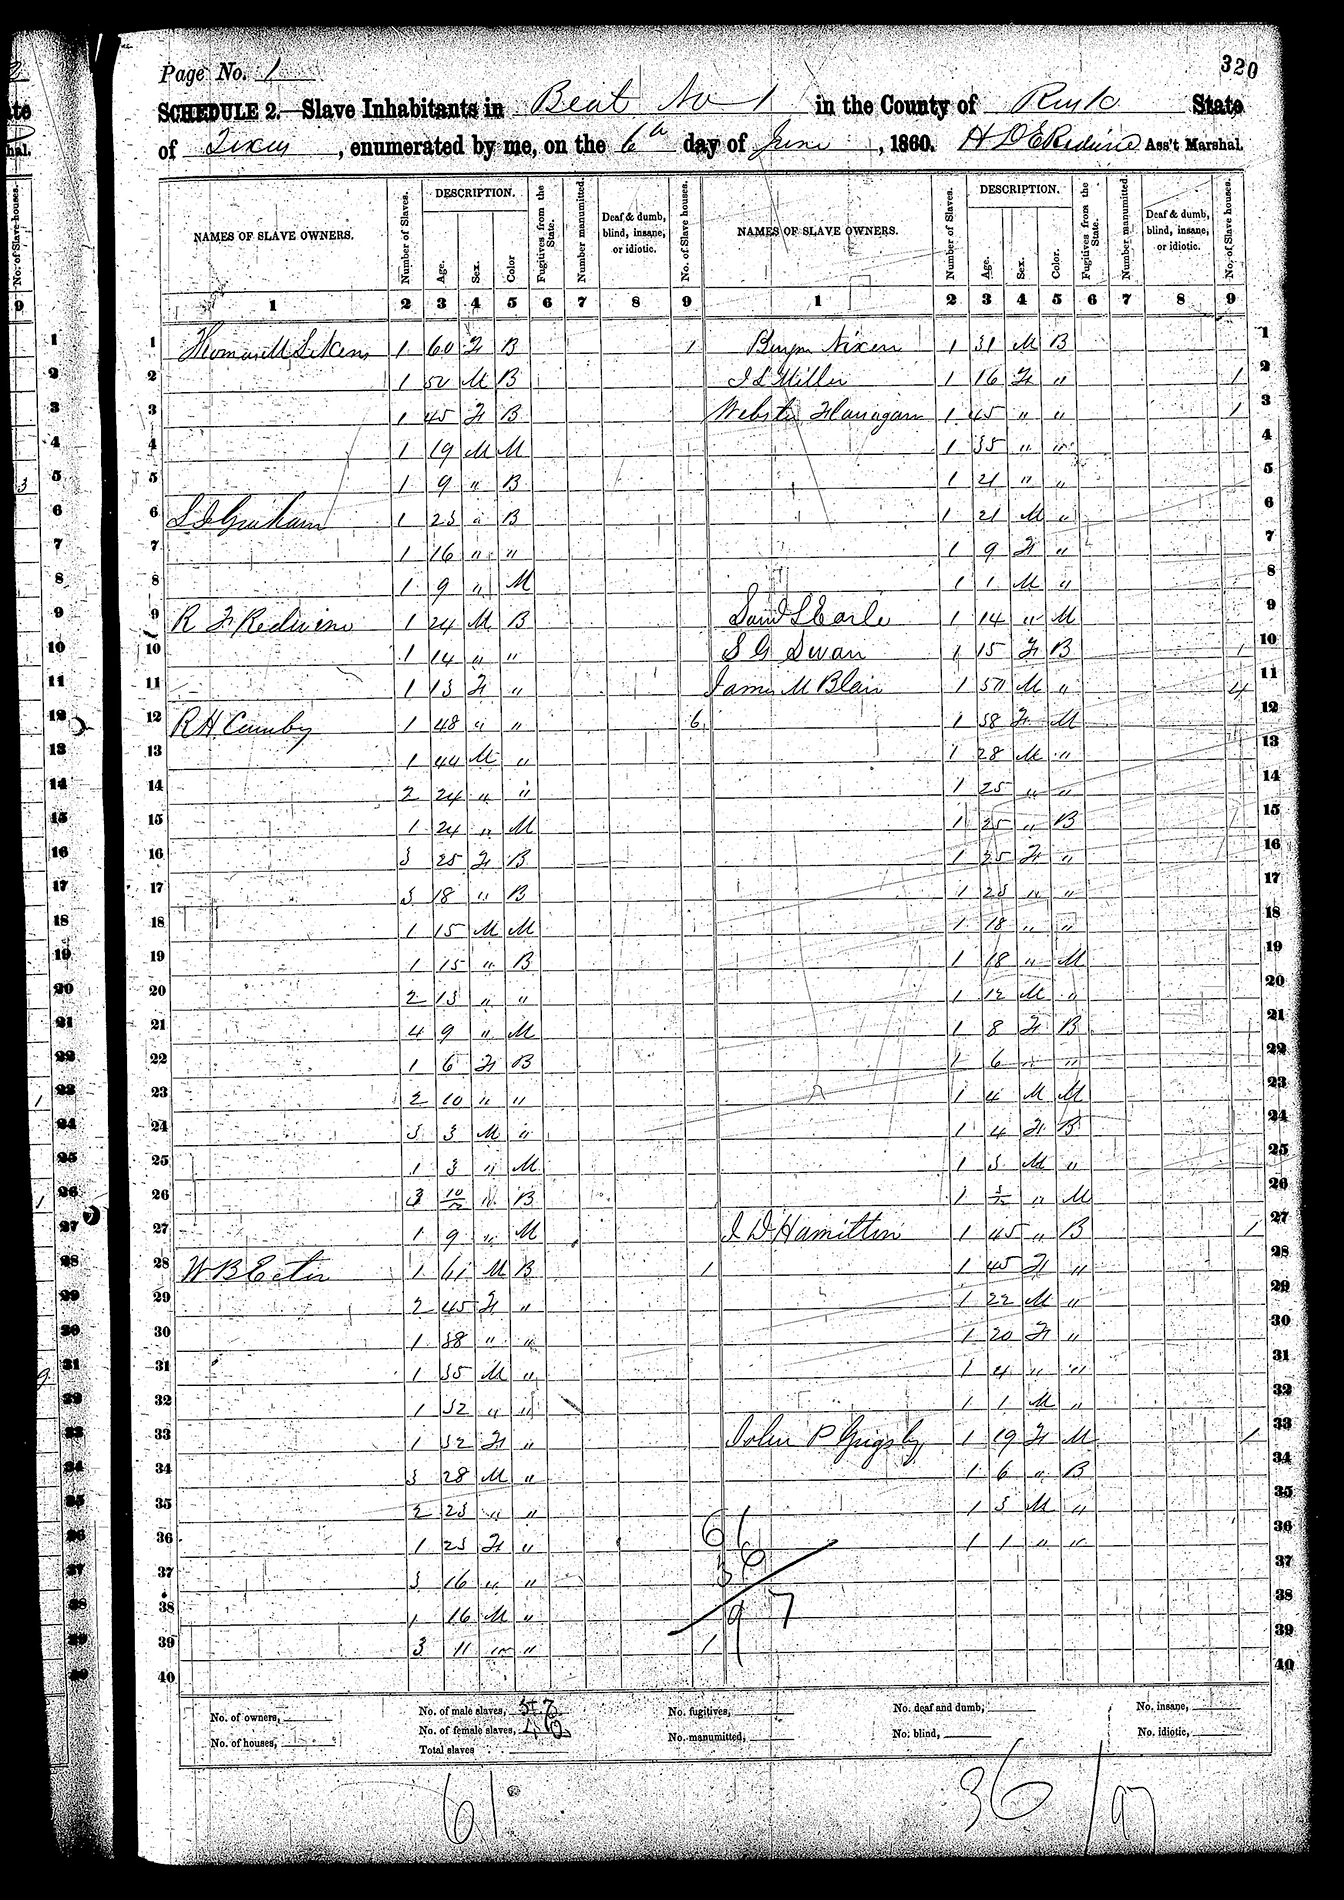 Black and white photocopy of a page of a slave census form, filled by hand.